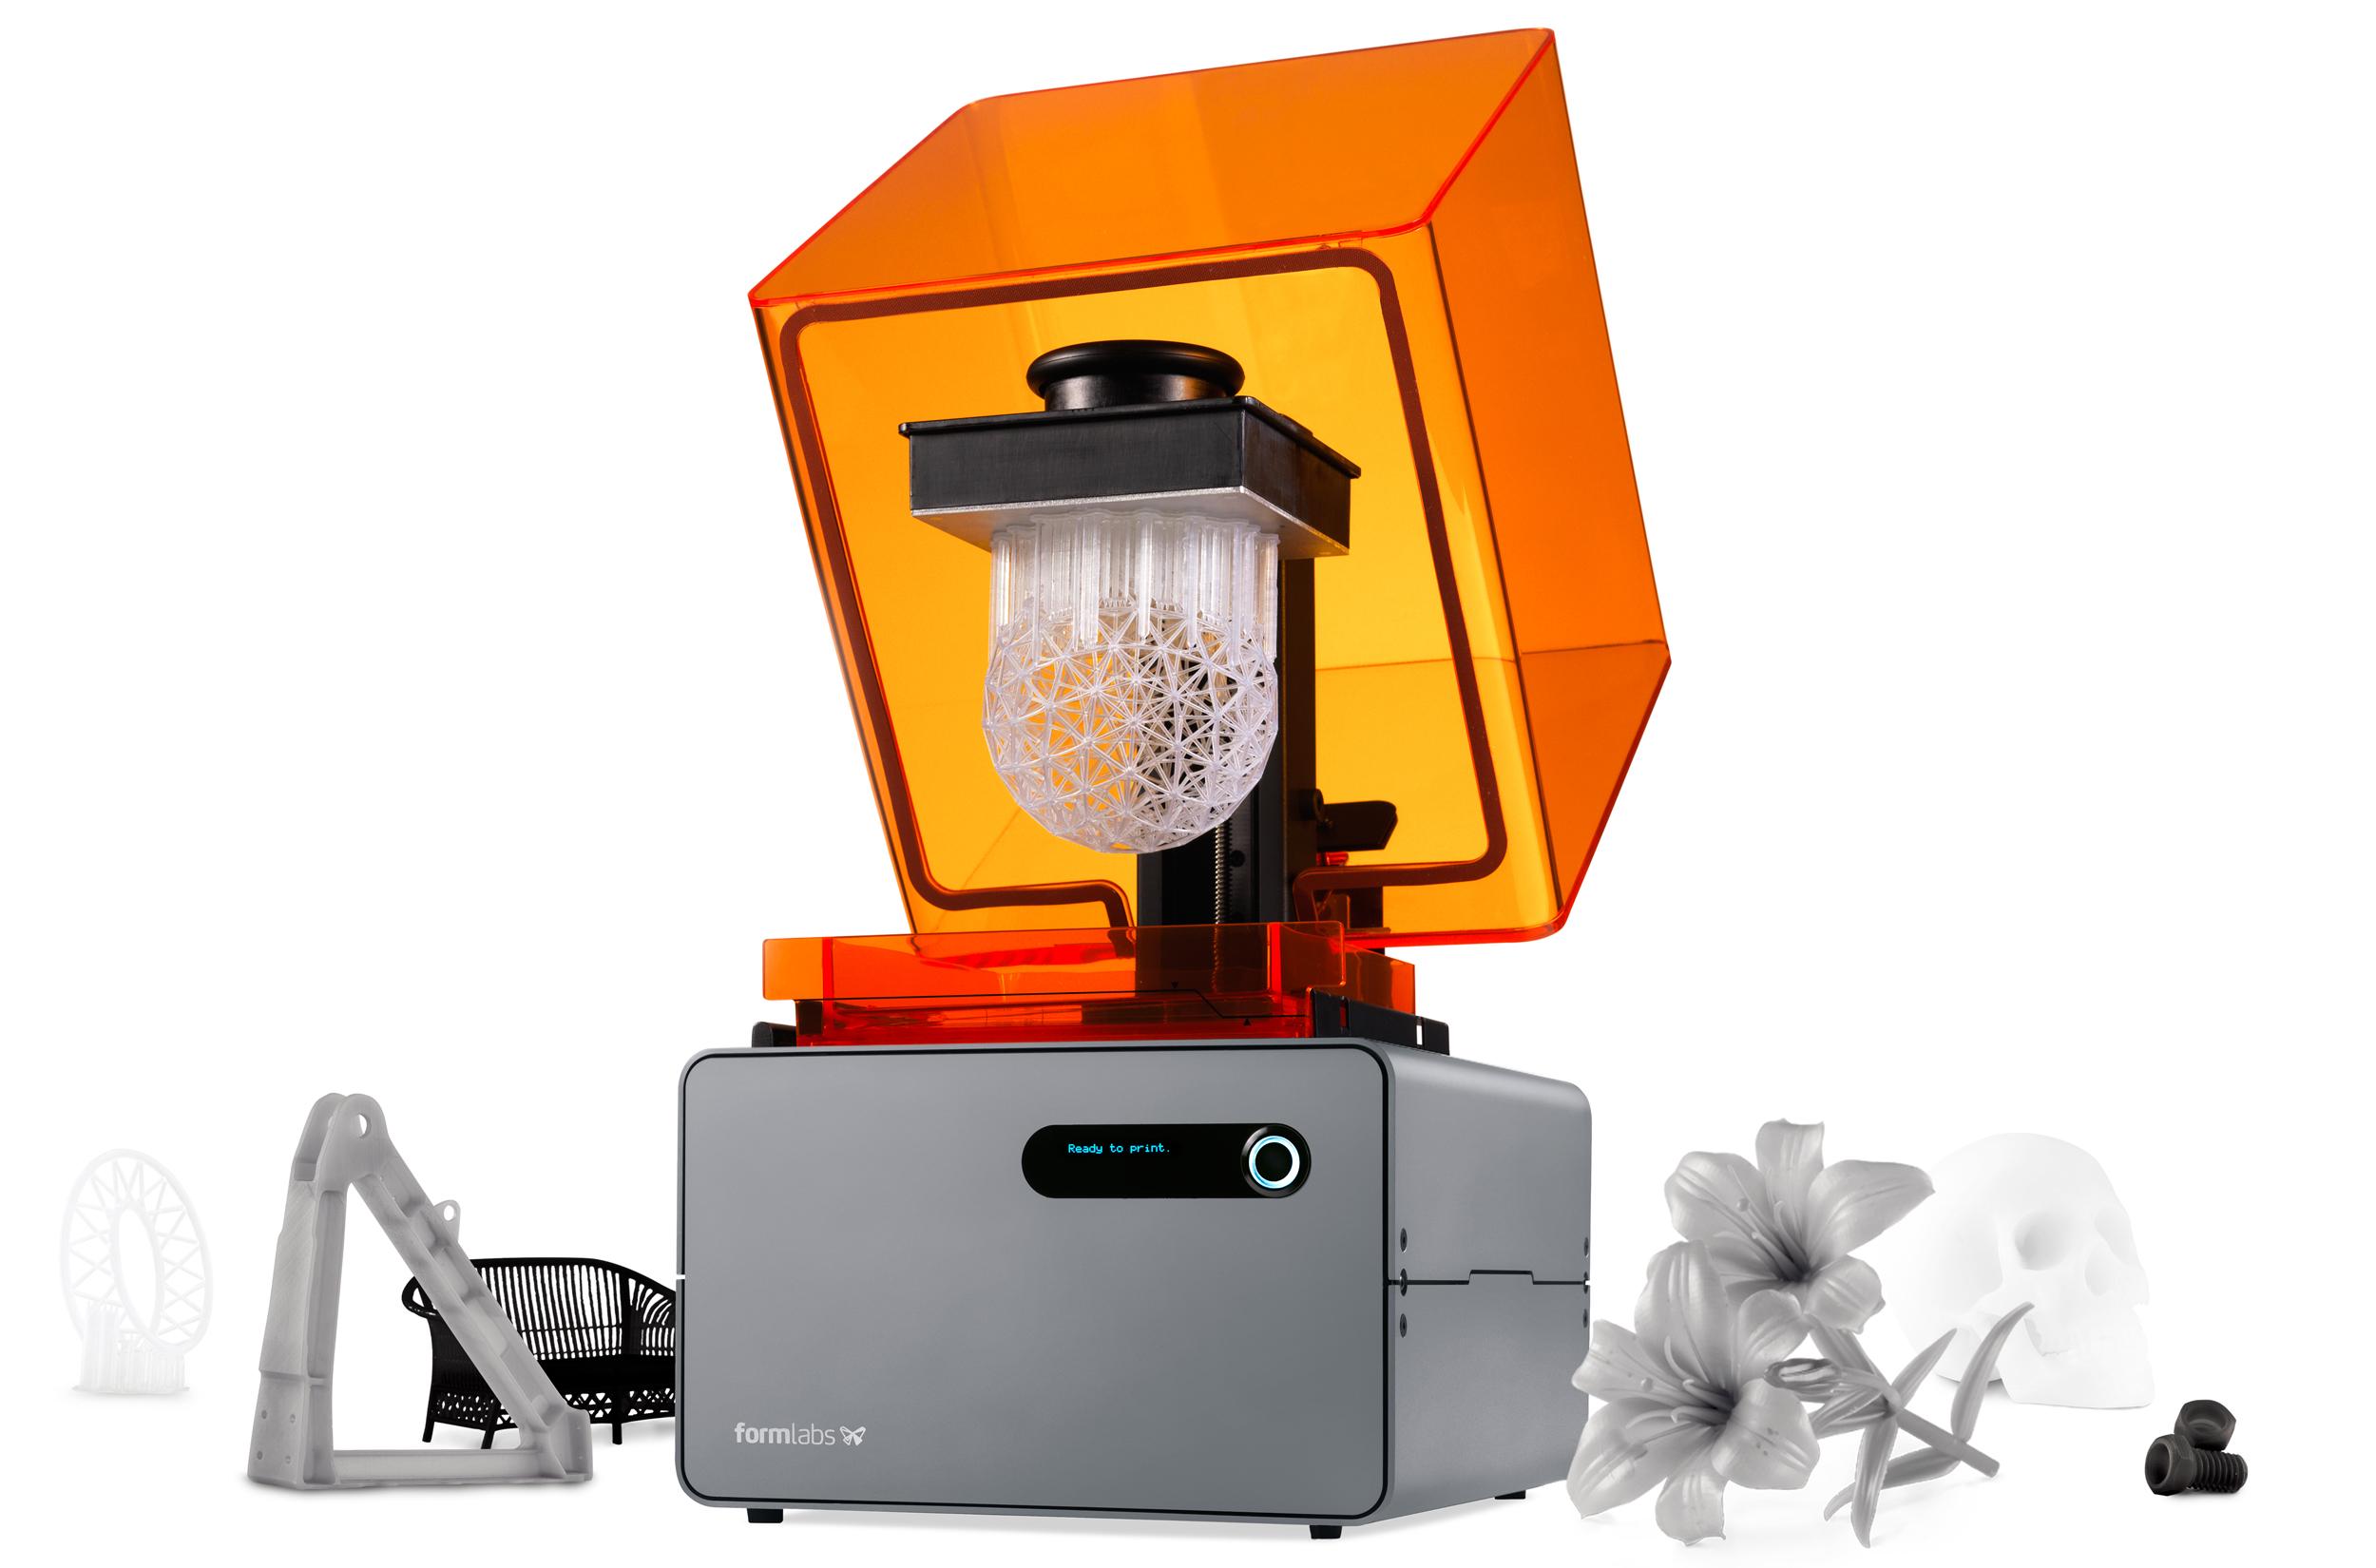 Formlabs Announces Their New Form 1+ SLA 3D Printer, Upgrade Option, New Material & Launch European Store - 3DPrint.com | The Voice of 3D Printing / Additive Manufacturing